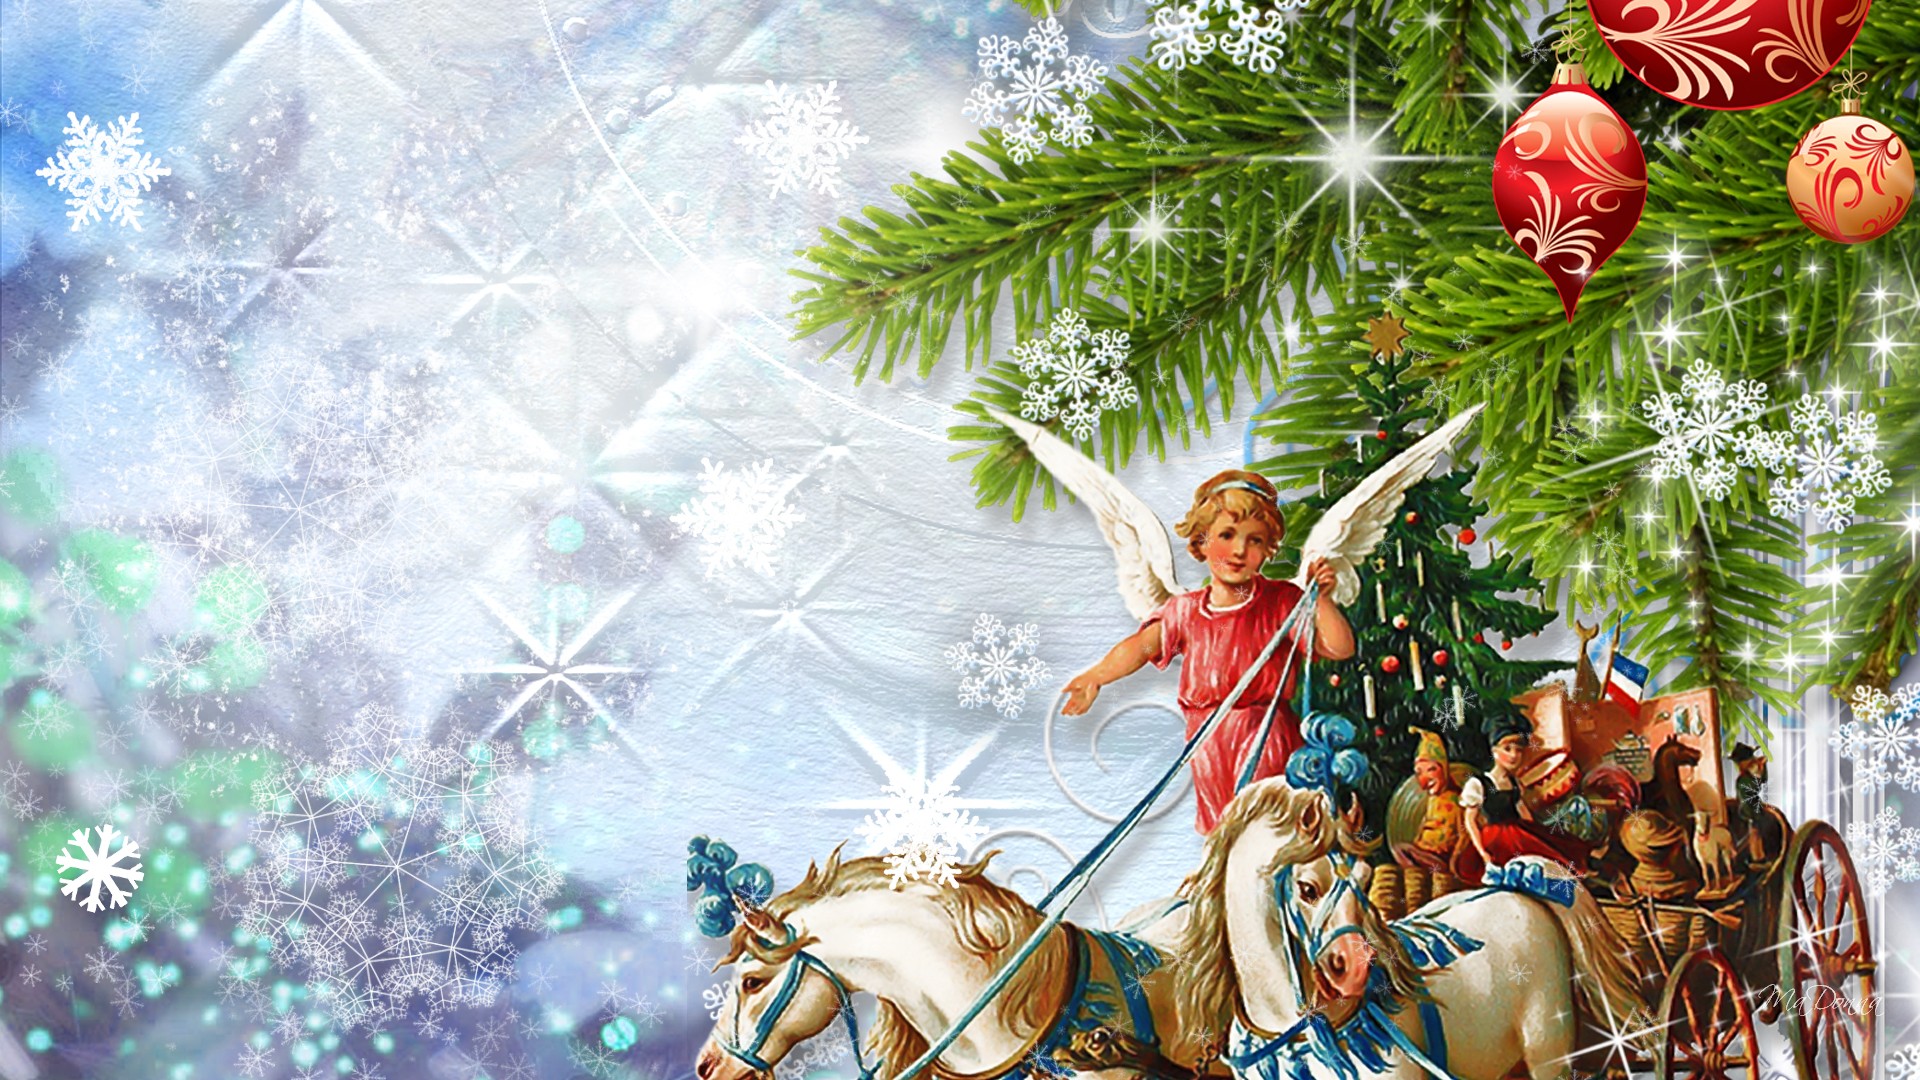 Provides Awesome Collection Of Christmas Angels Wallpaper Pictures